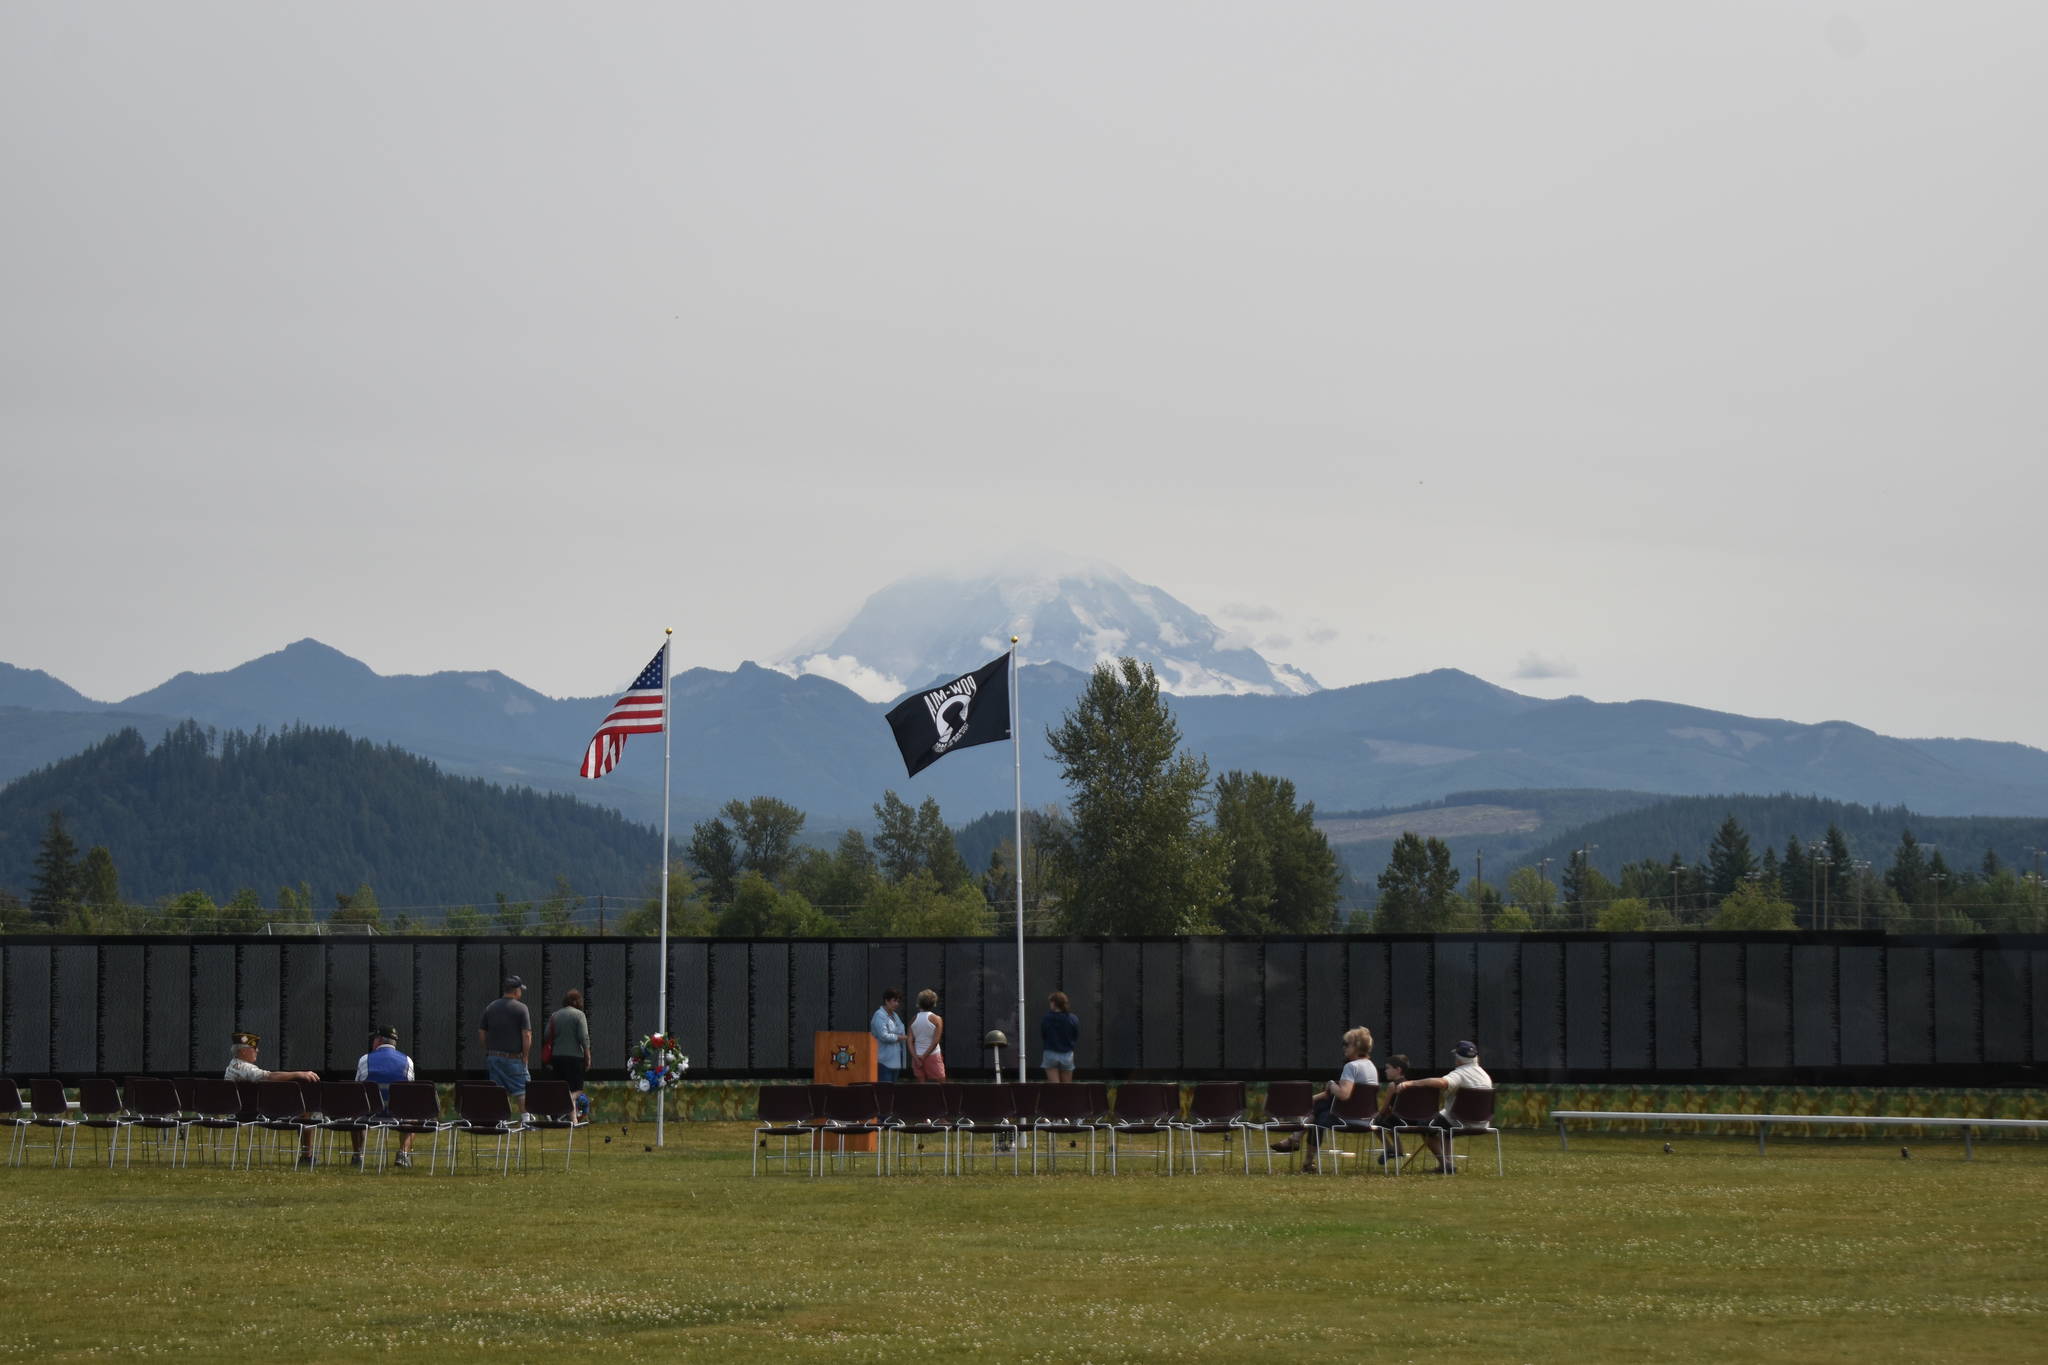 Mount Rainier rises behind The Moving Wall as its sits in a grassy field near Sunrise Elementary the afternoon of Thursday, Aug. 5. Photo by Alex Bruell.